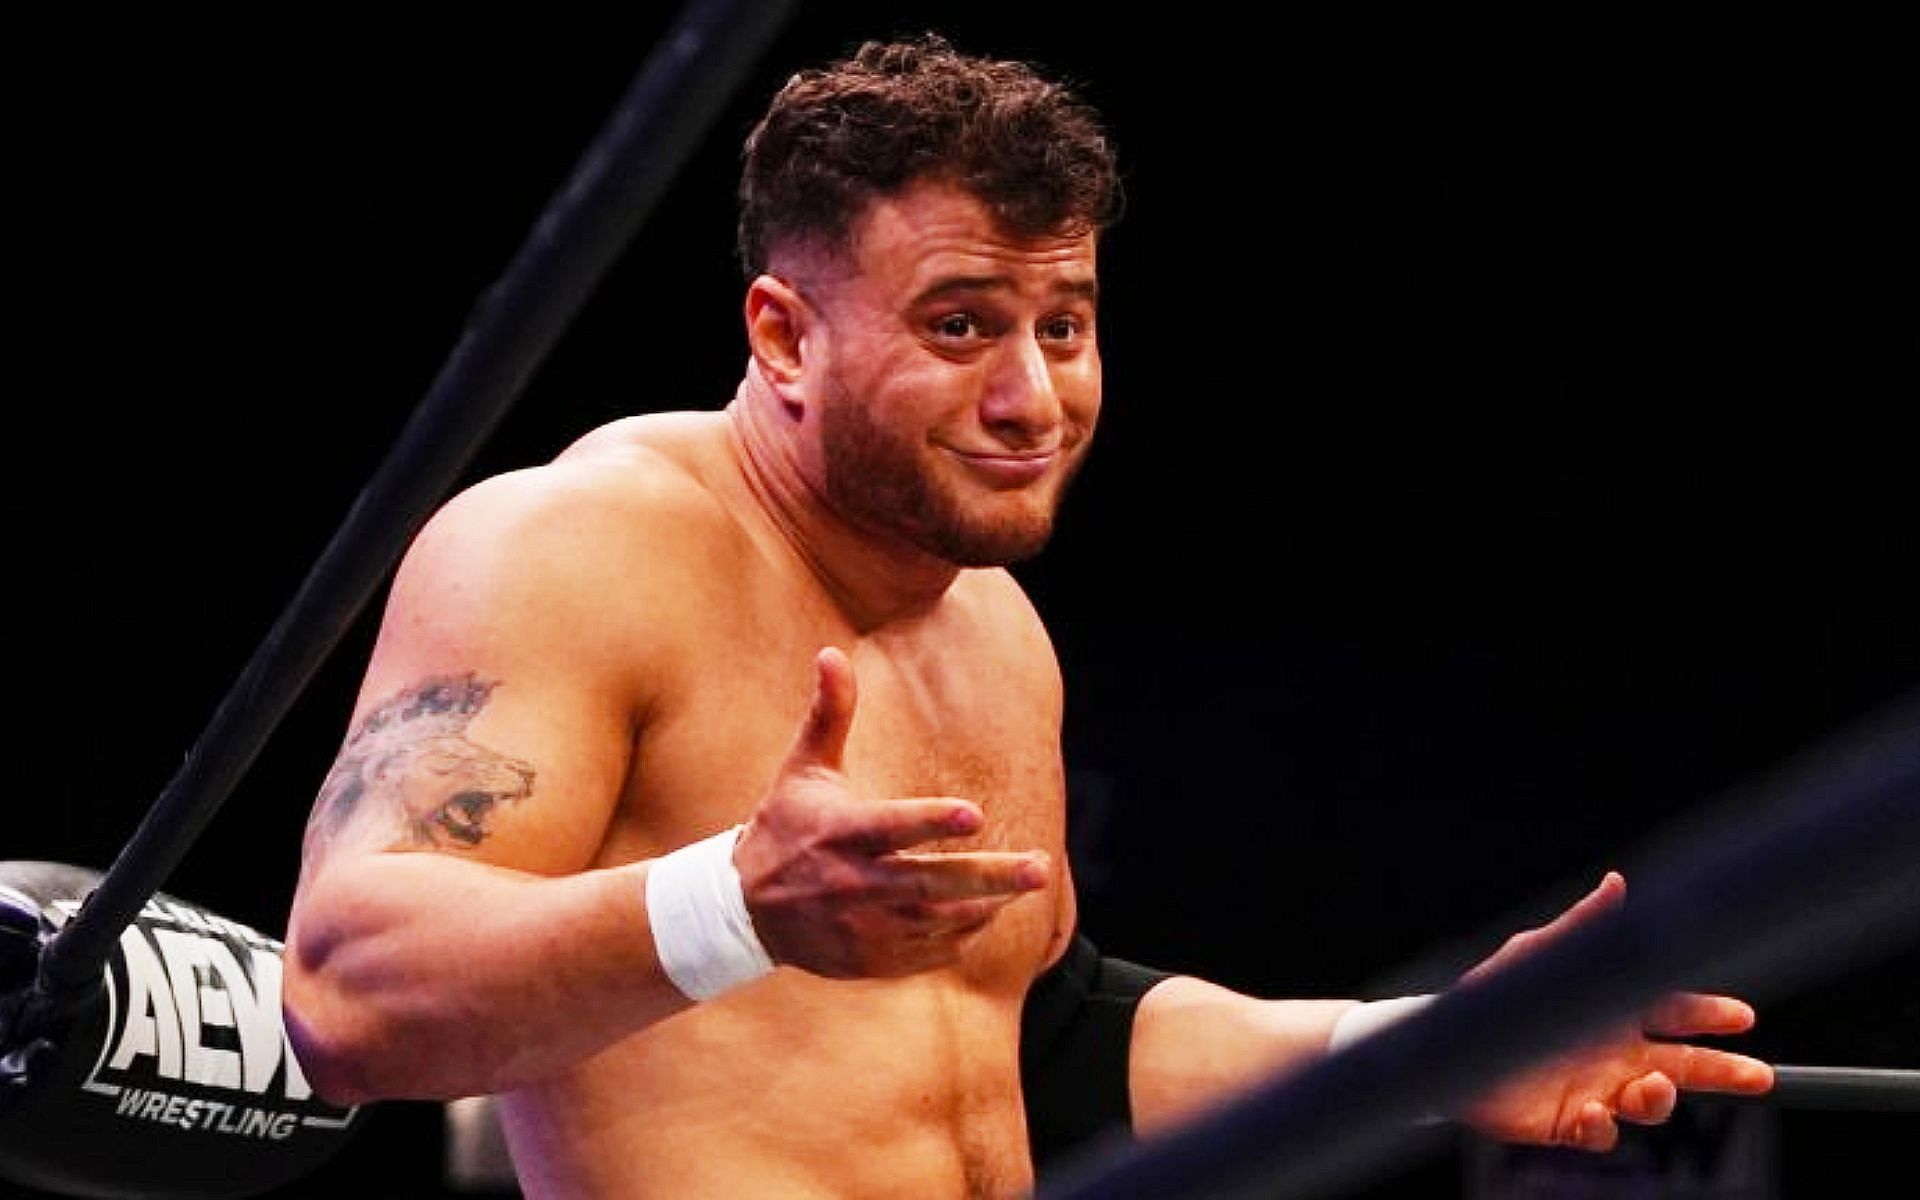 Prominent MMA fighter has his sight set on MJF